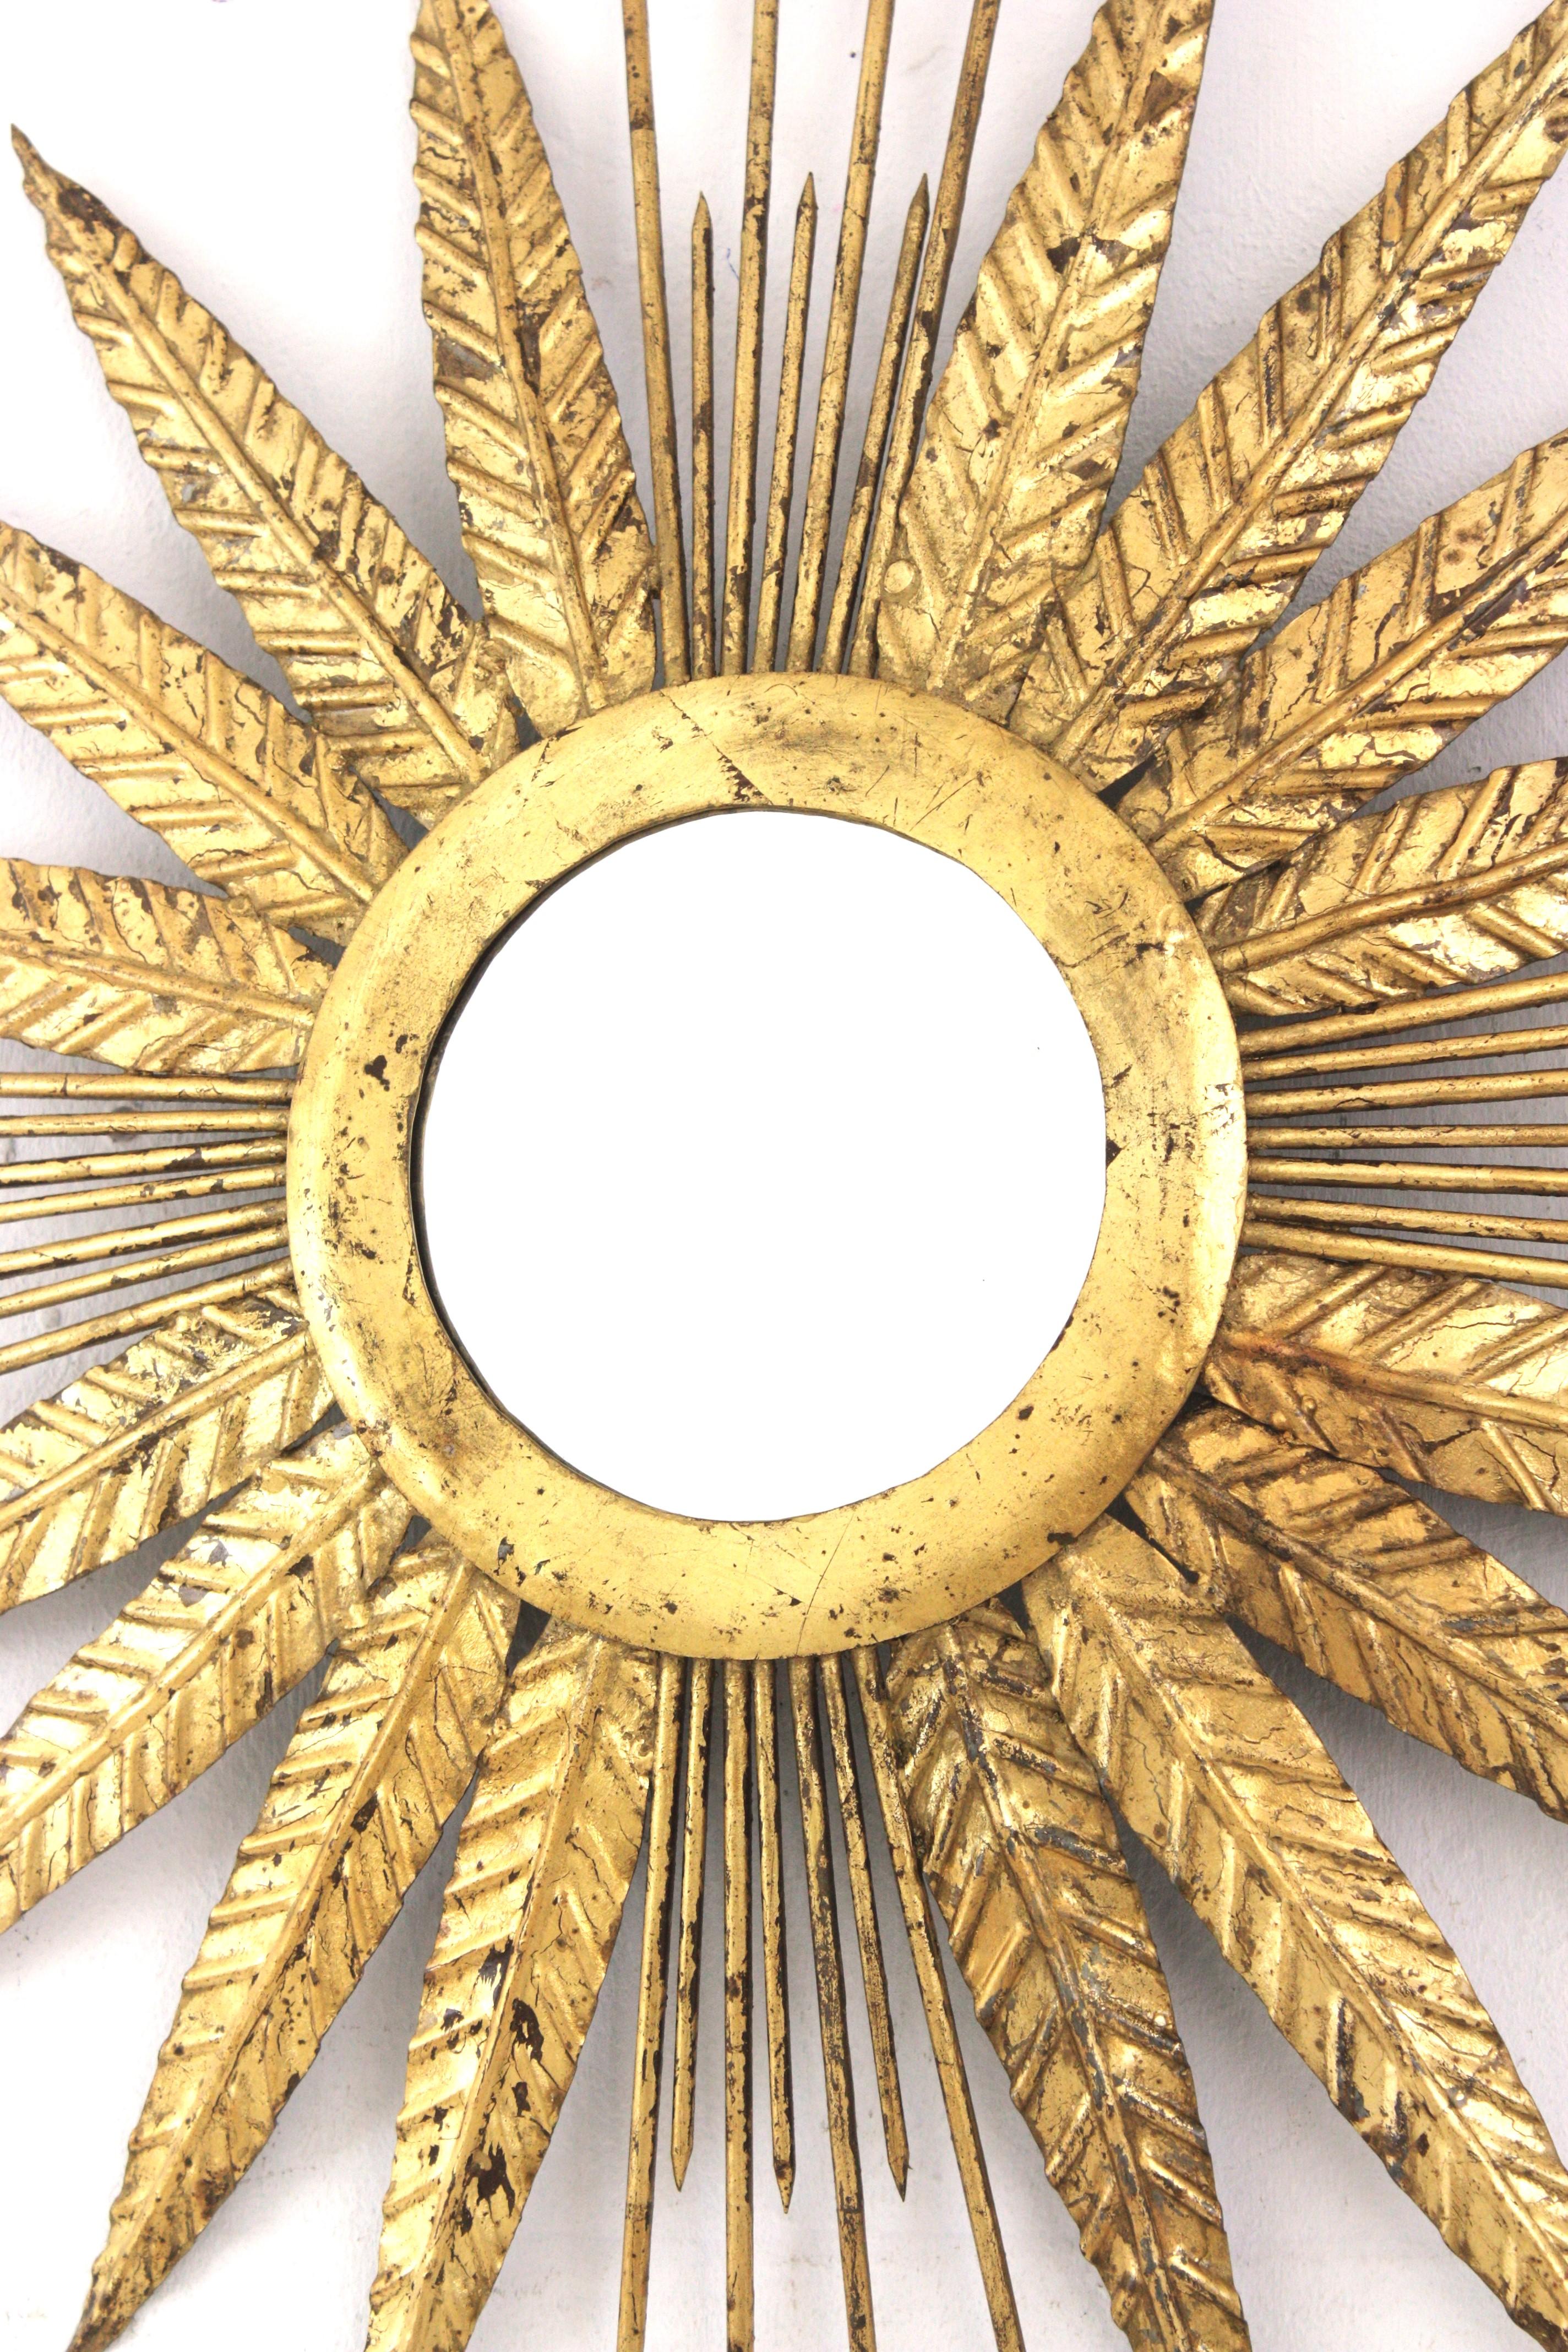 French Sunburst Mirror in Gilt Iron with Spikey Leafed Frame, 1940s For Sale 3